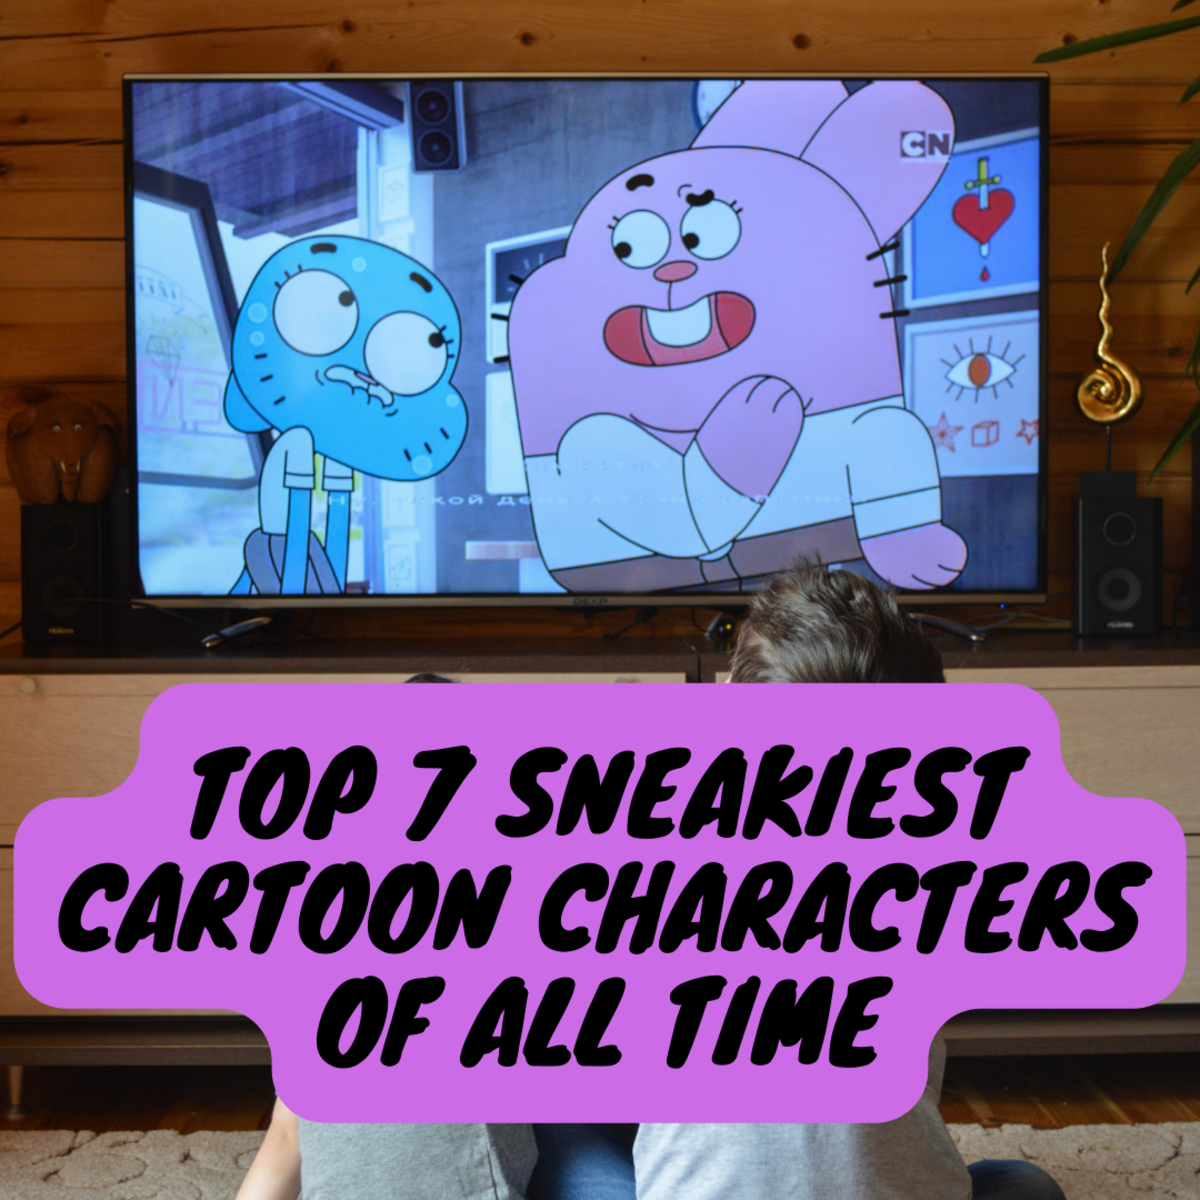 Top 7 Sneakiest Cartoon Characters of All Time